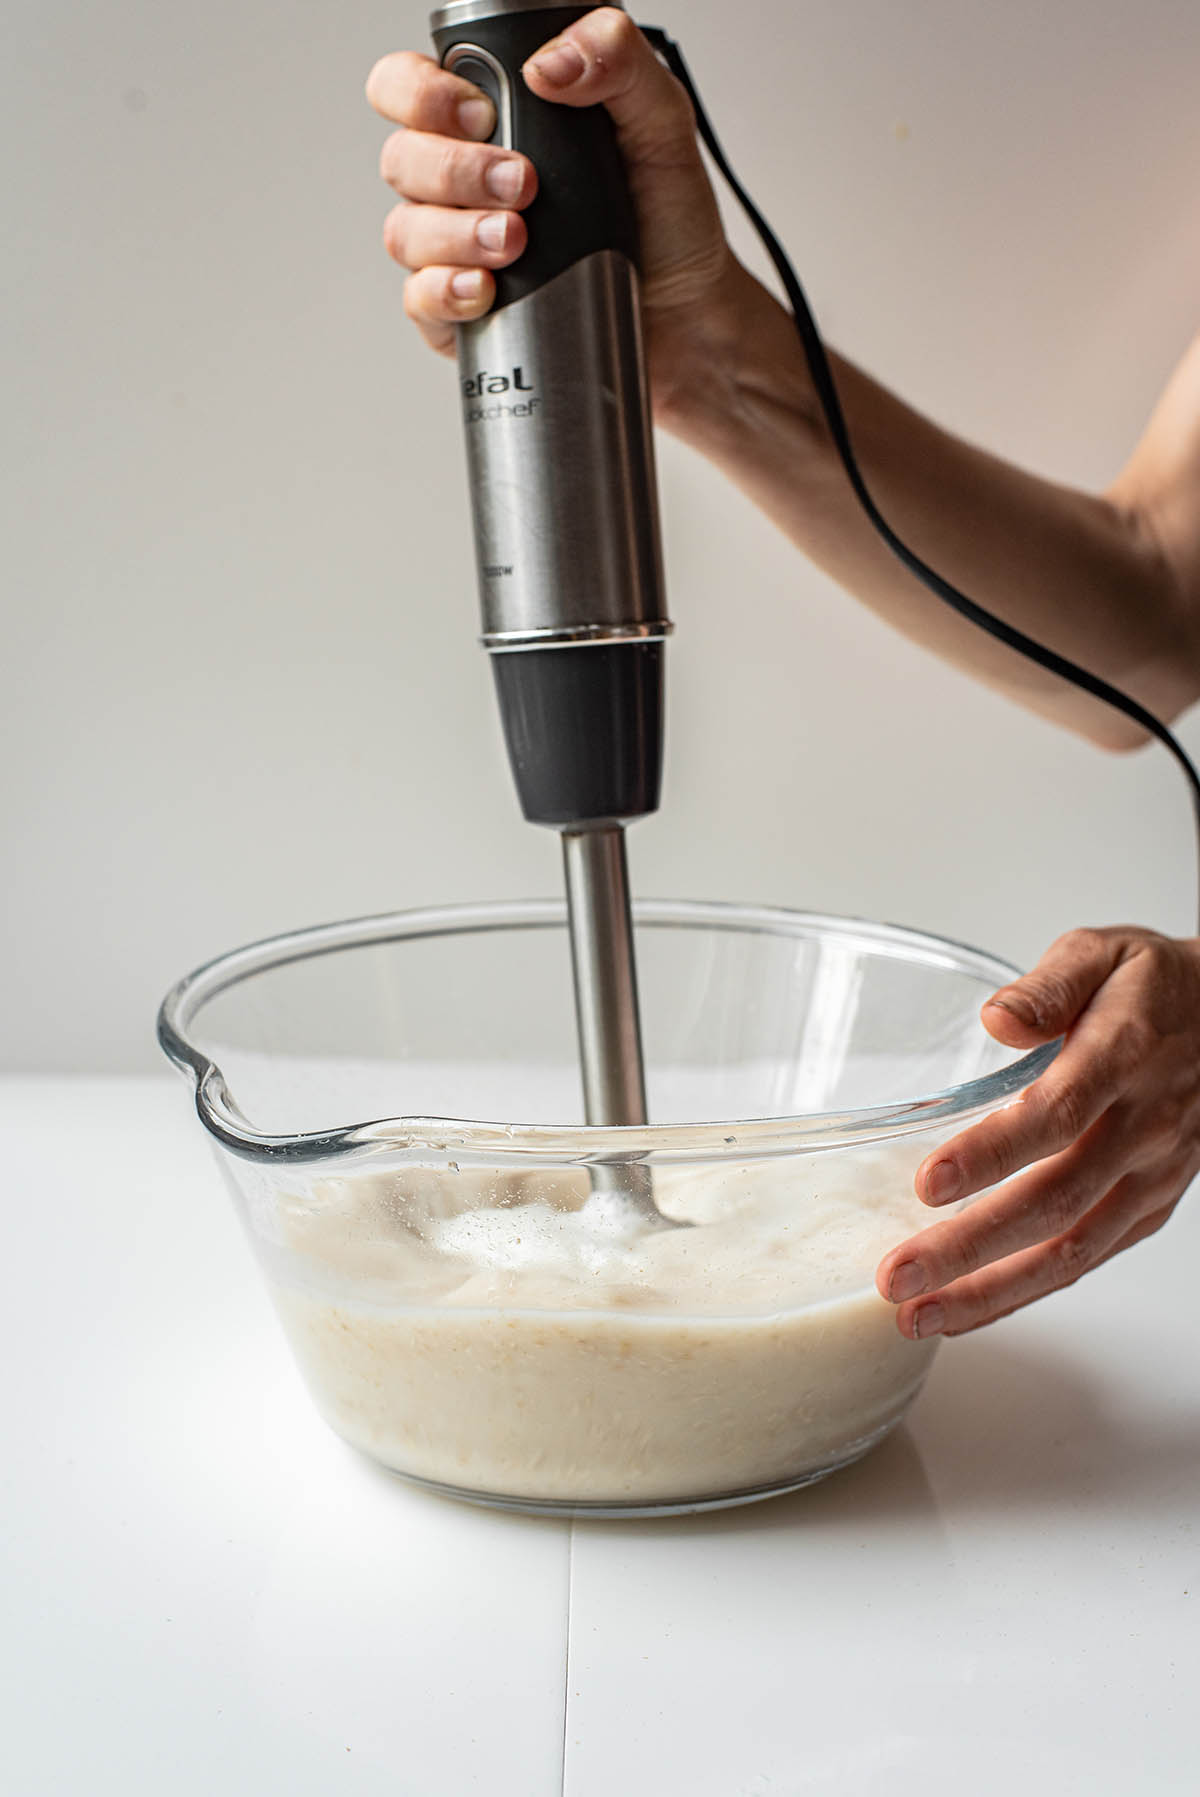 Blending oat milk with an immersion blender in a glass bowl.